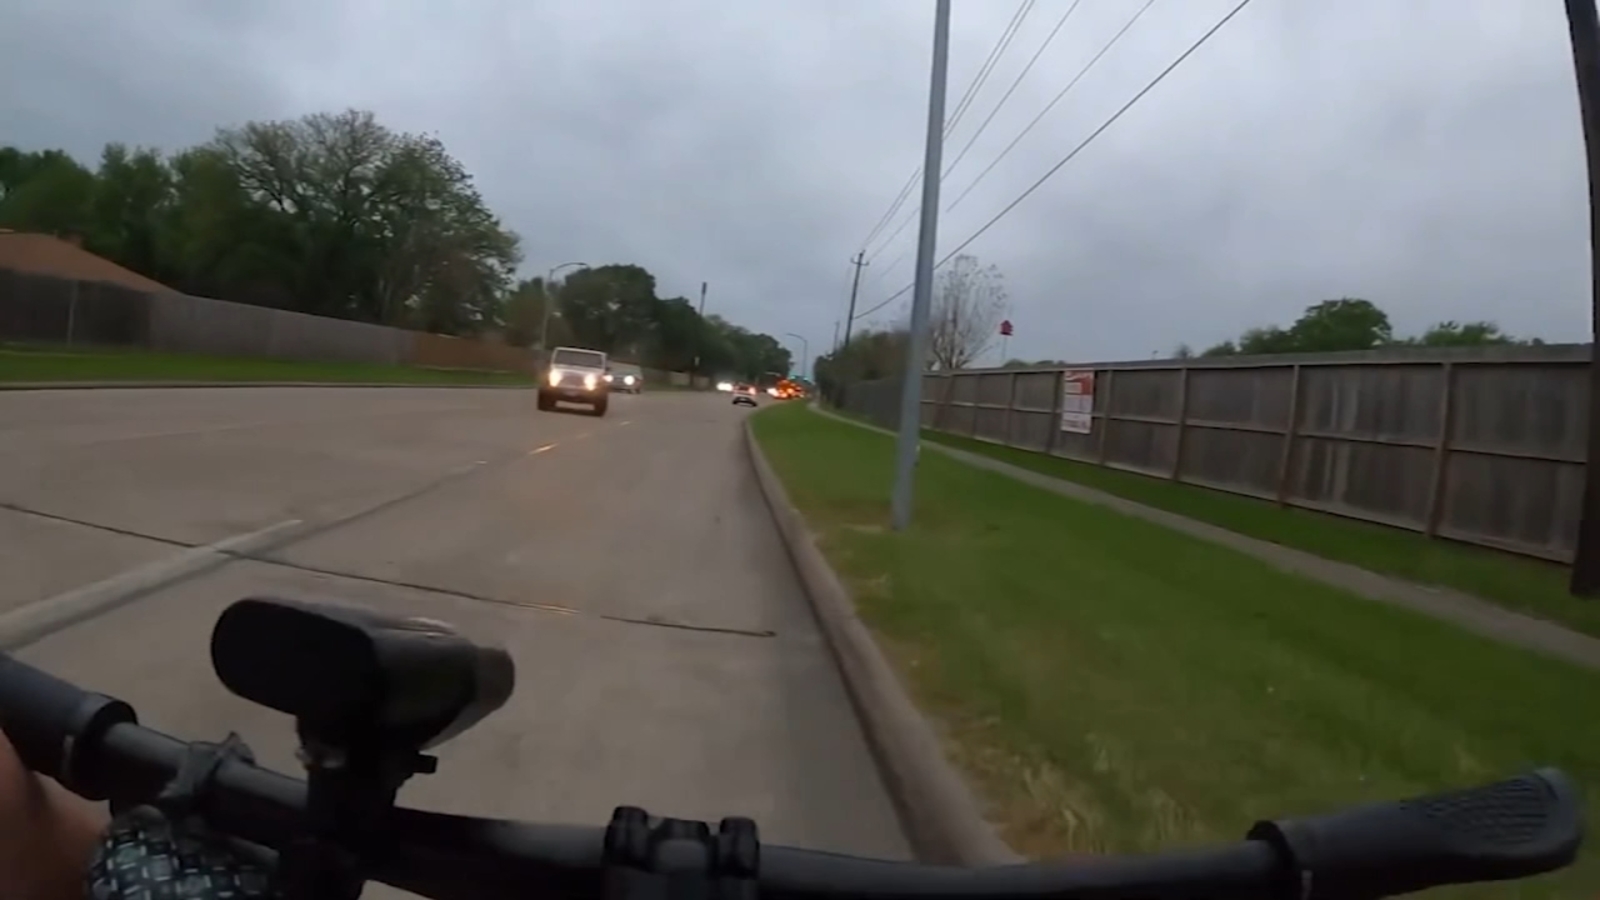  Road rage against cyclist in Deer Park caught on camera 